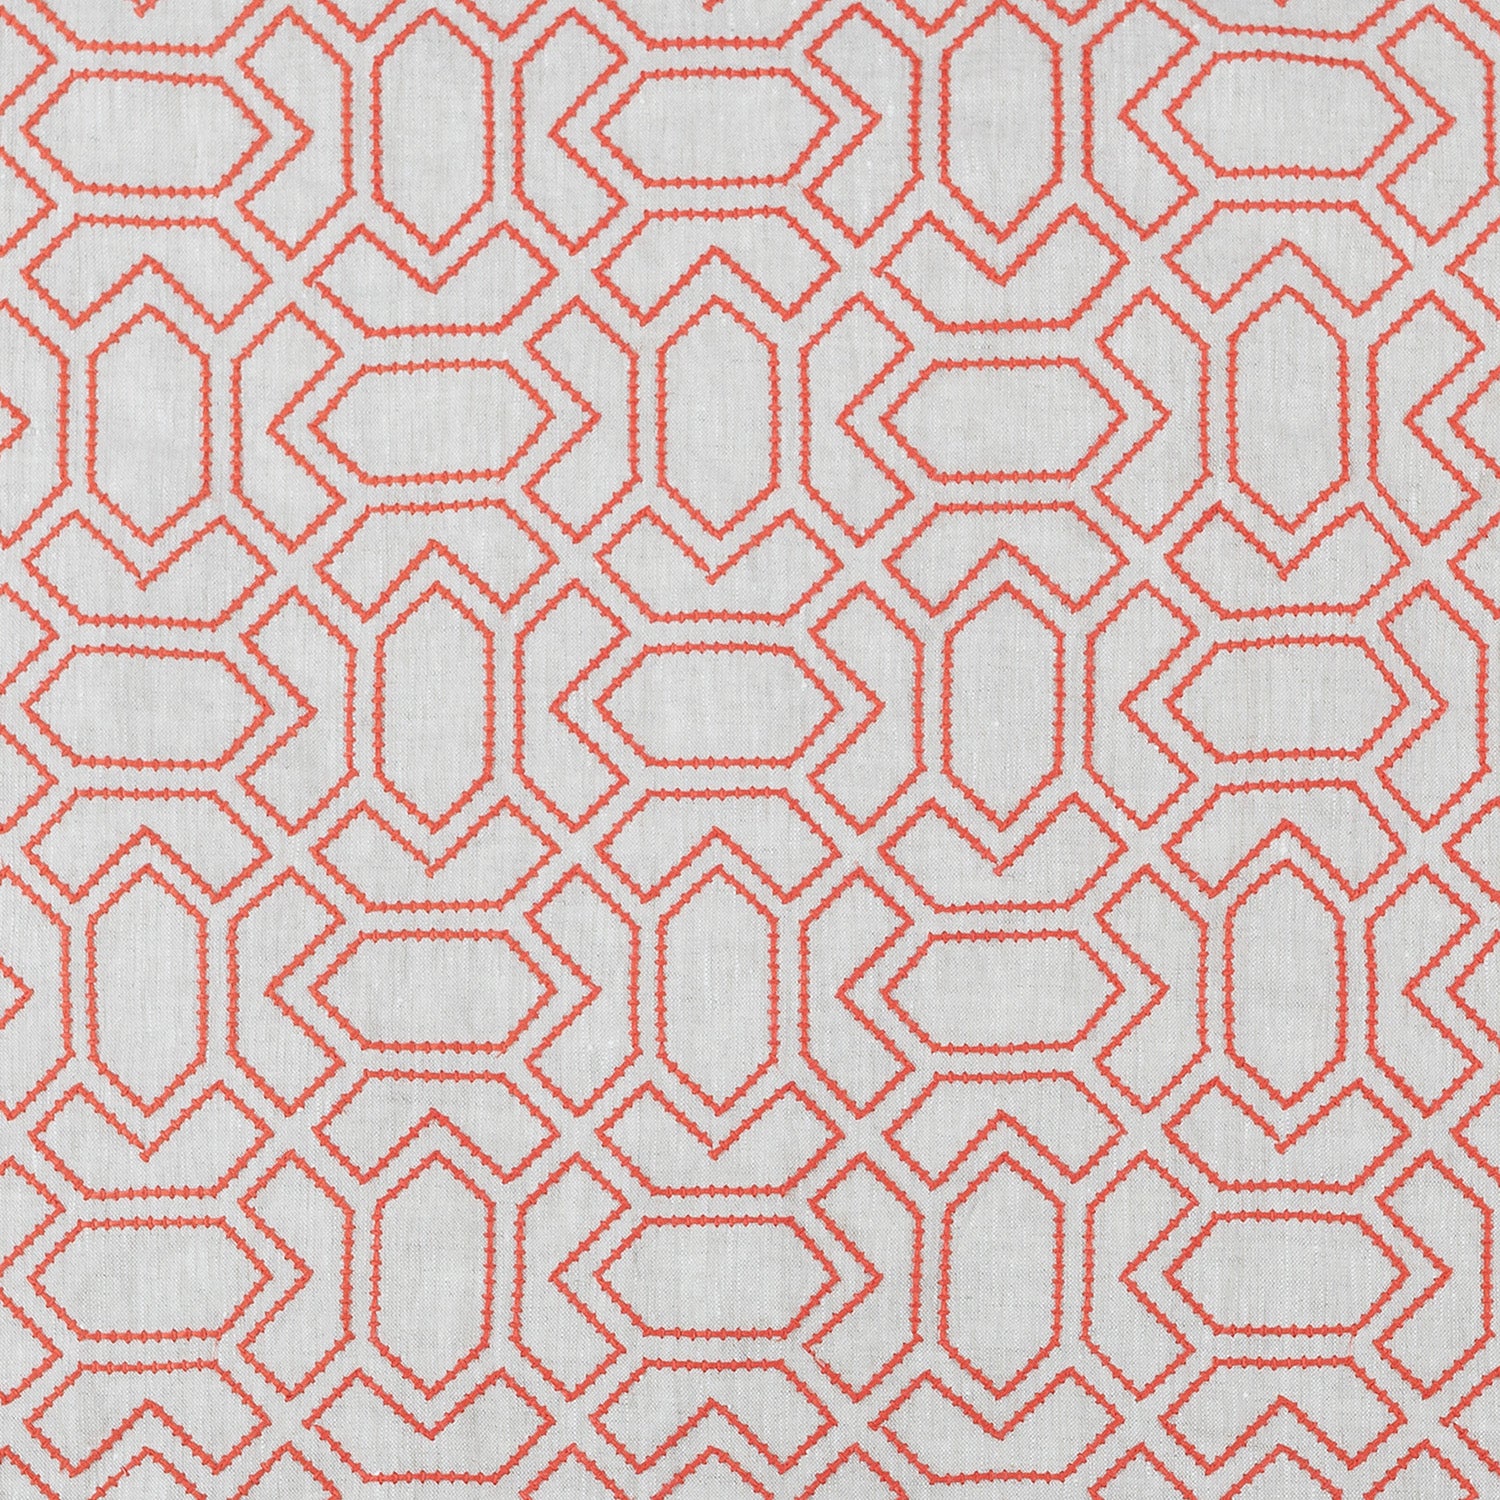 Fabric with an embroidered geometric grid print in coral on a light gray field.